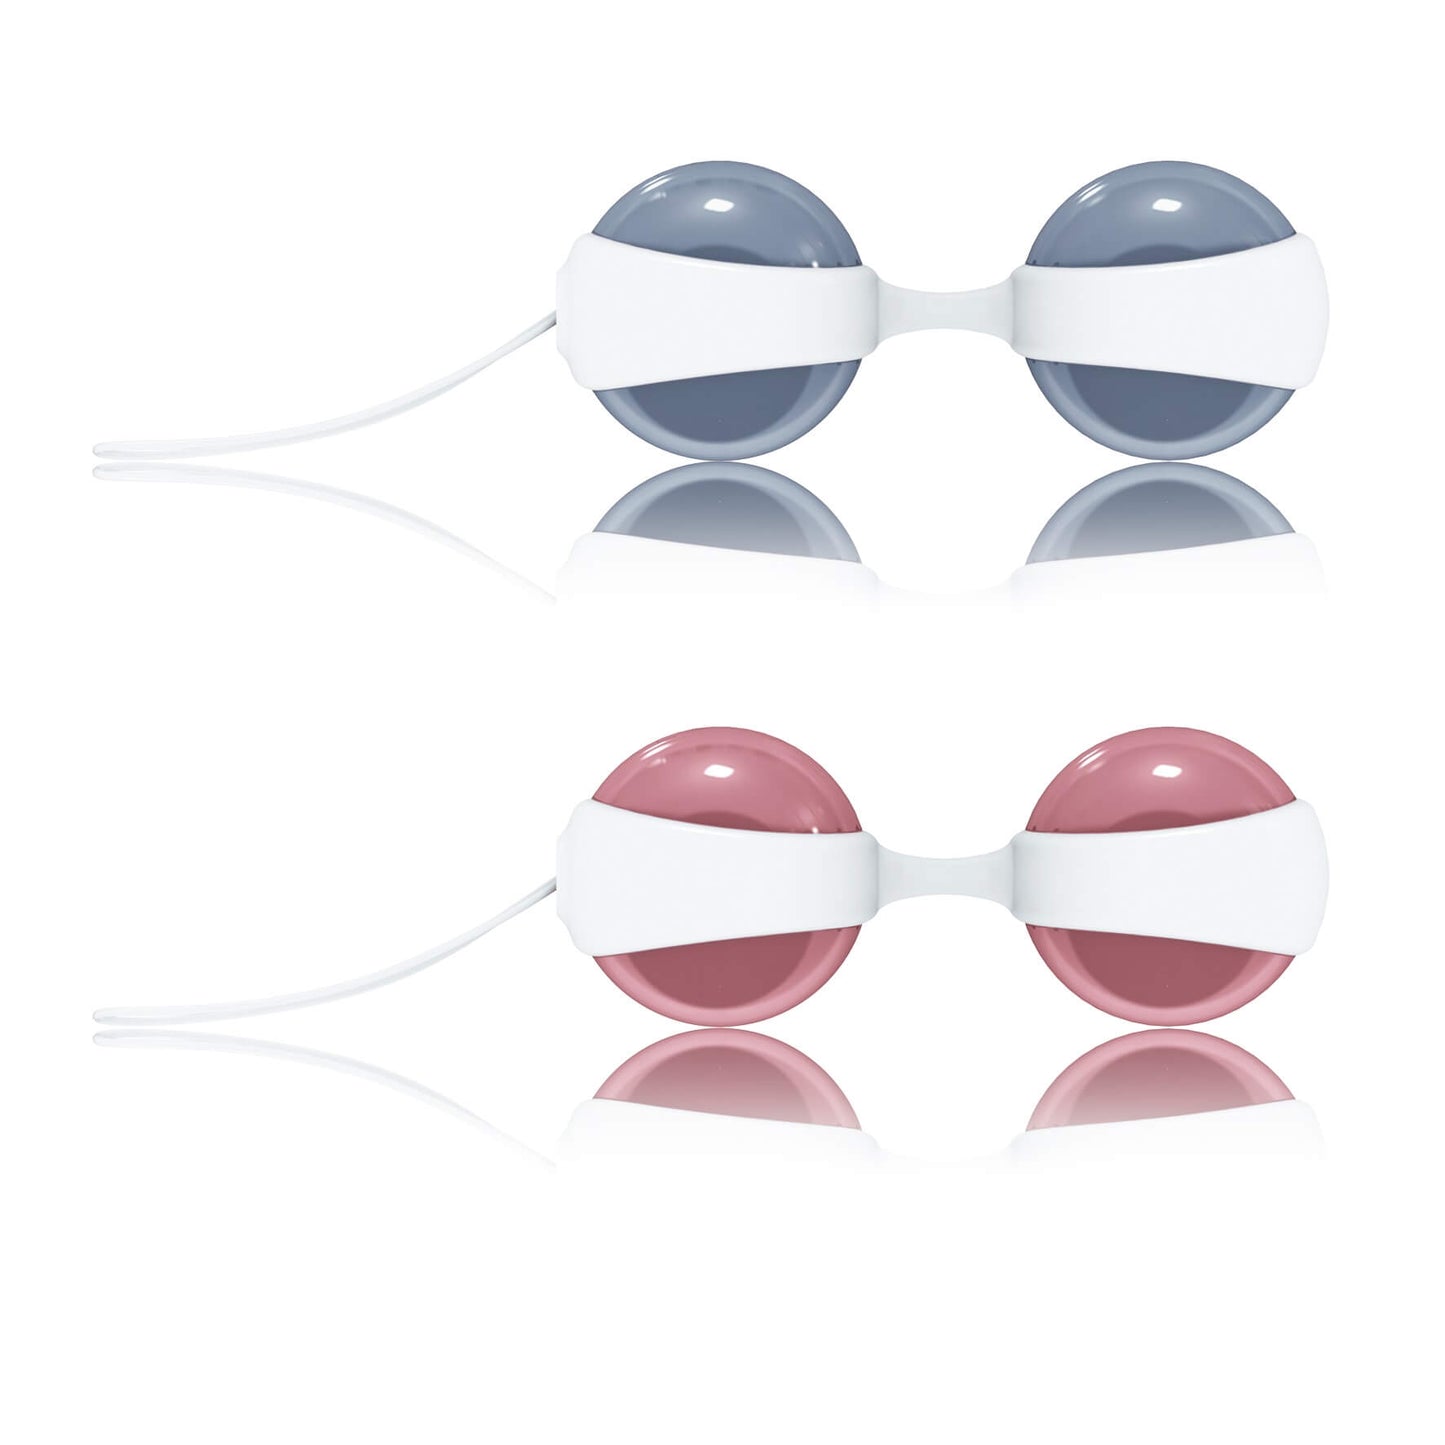 LELO Luna Beads - The Bigger O online sex toy shop USA, Canada & UK shipping available